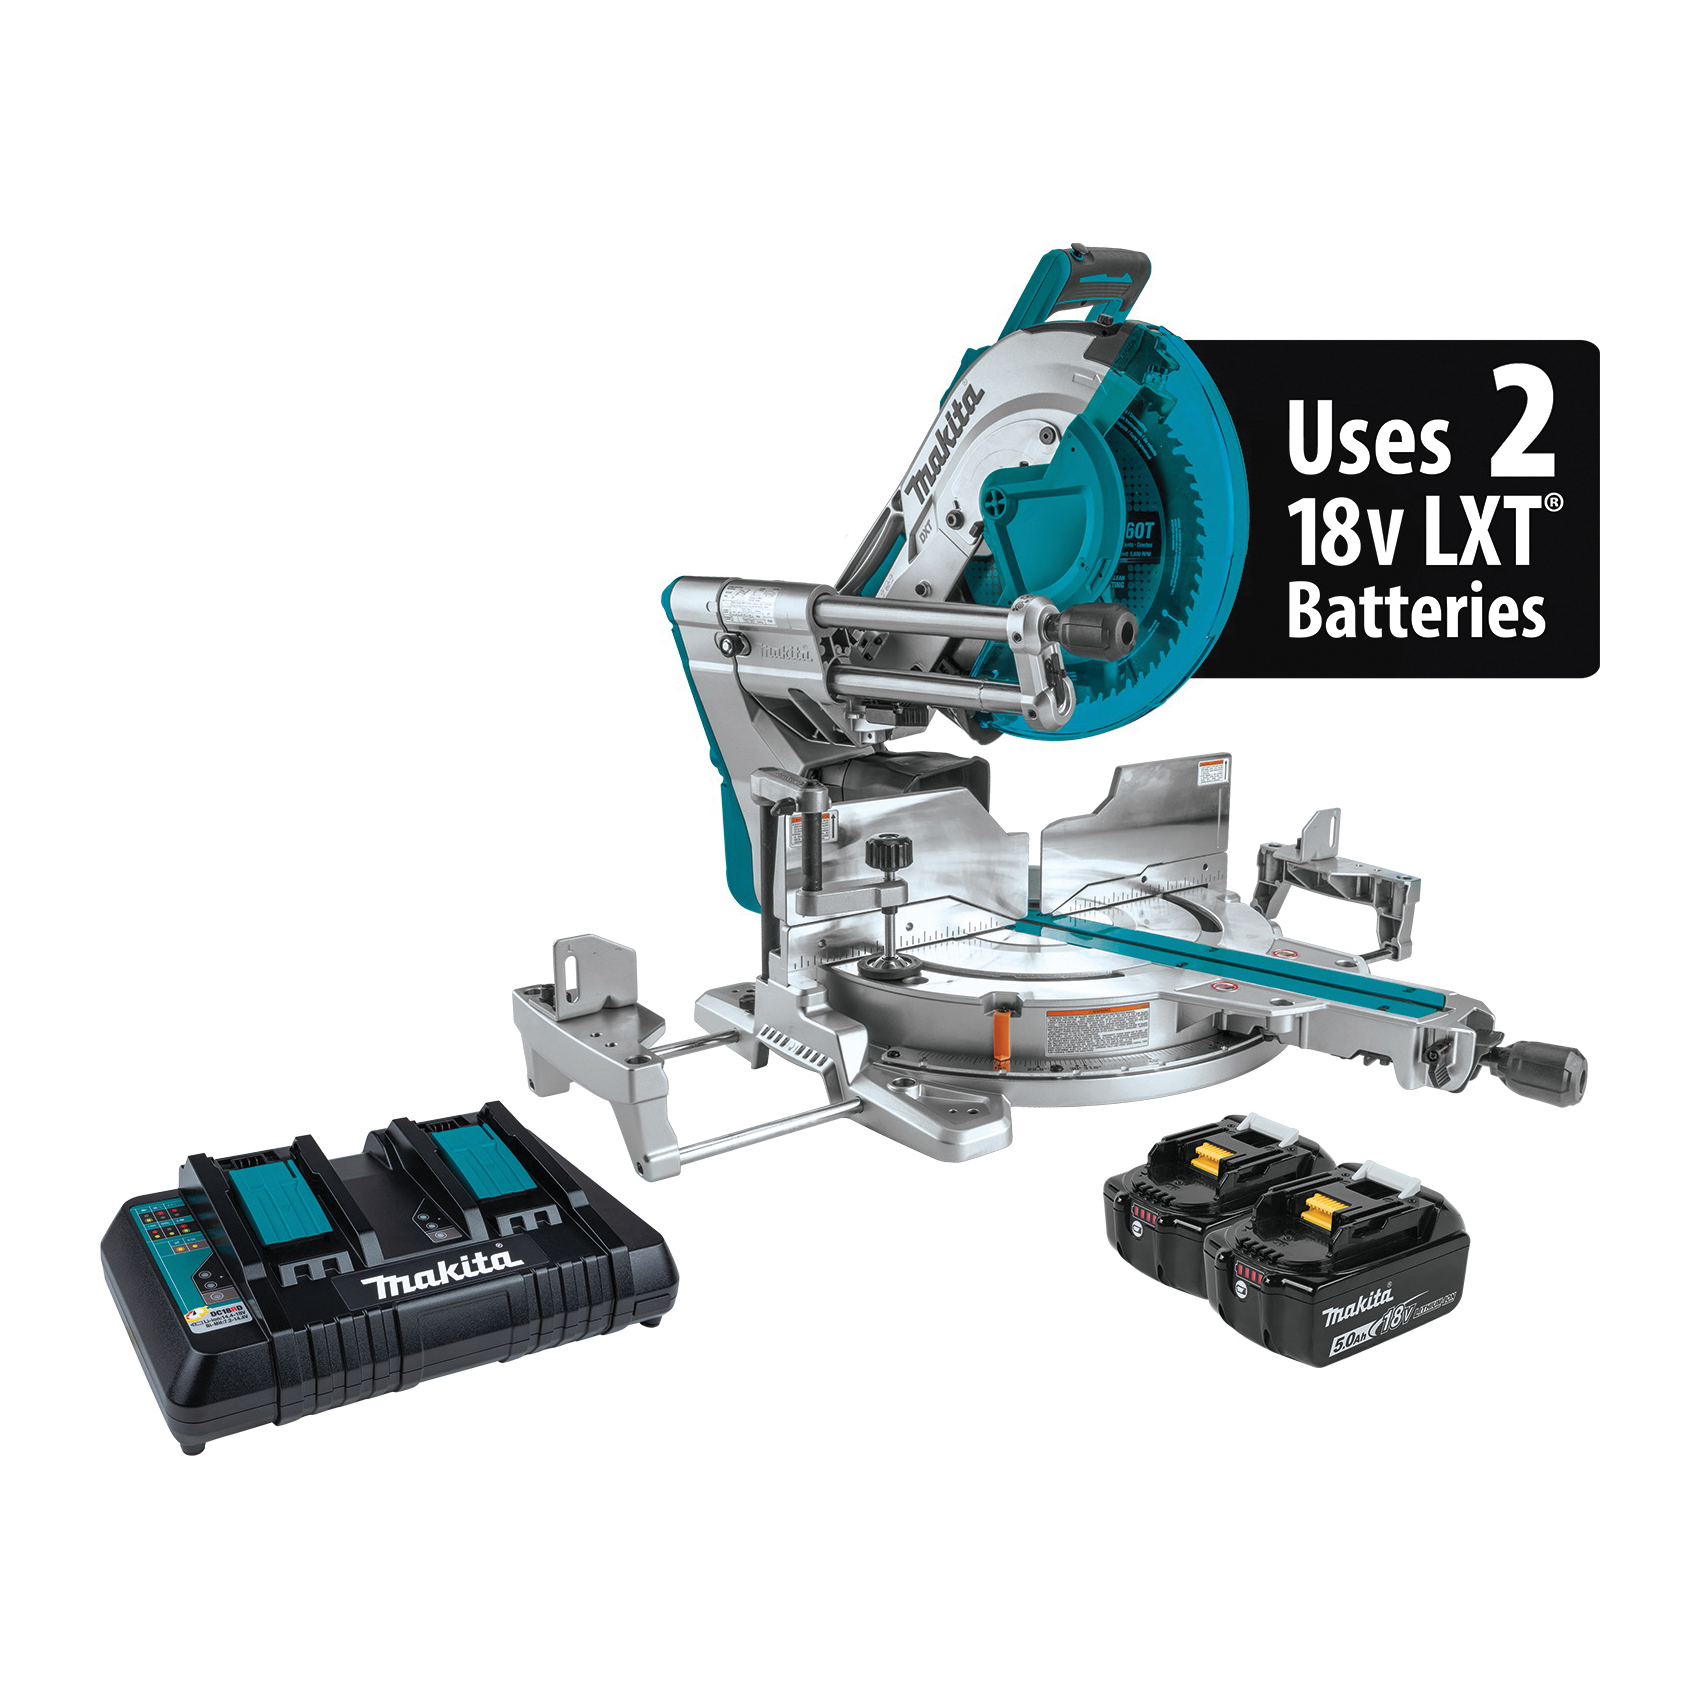 Makita LXT XSL07PT Miter Saw with Laser Kit, Battery, 12 in Dia Blade, 4400 rpm Speed, 0 to 60 deg Max Miter Angle